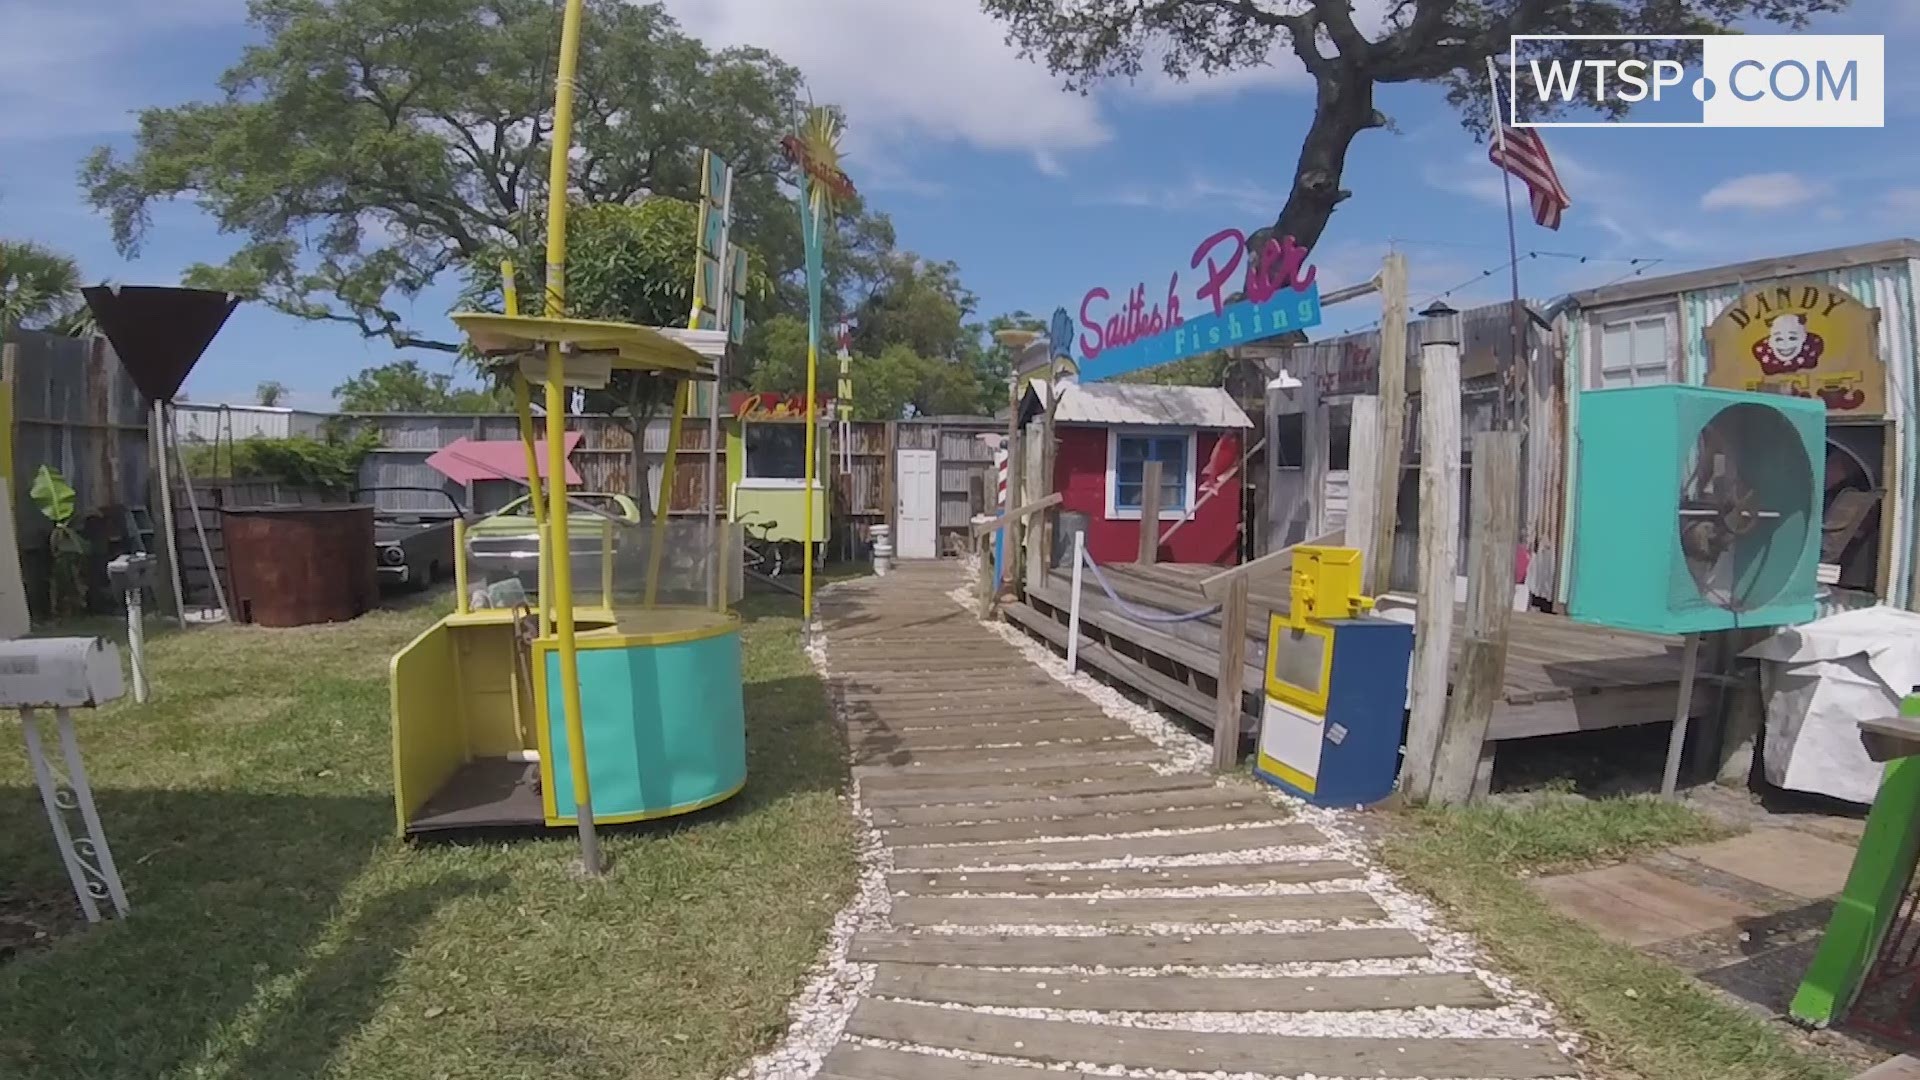 Friends to Tiny Town calls it 'the leftovers of St. Pete.'